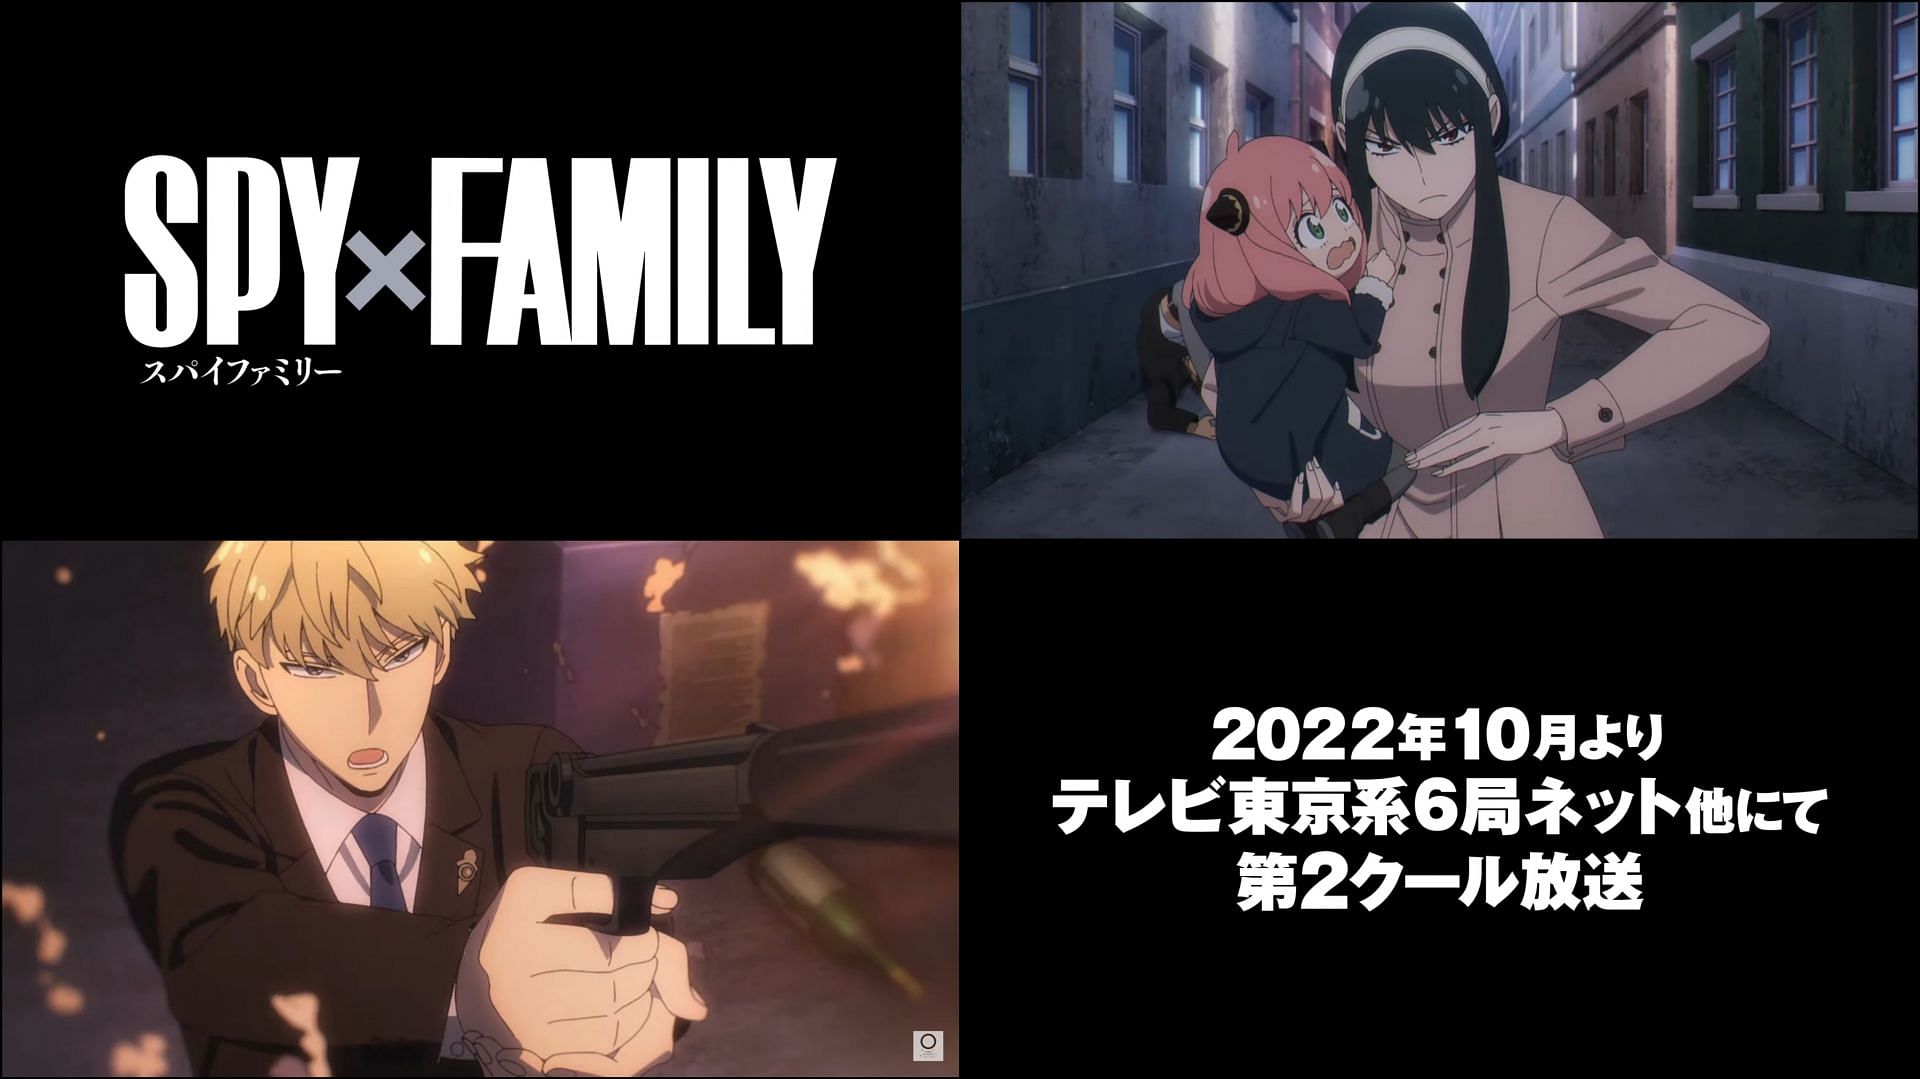 Spy X Family 2nd cour preview and release window (Image via Toho Animation)